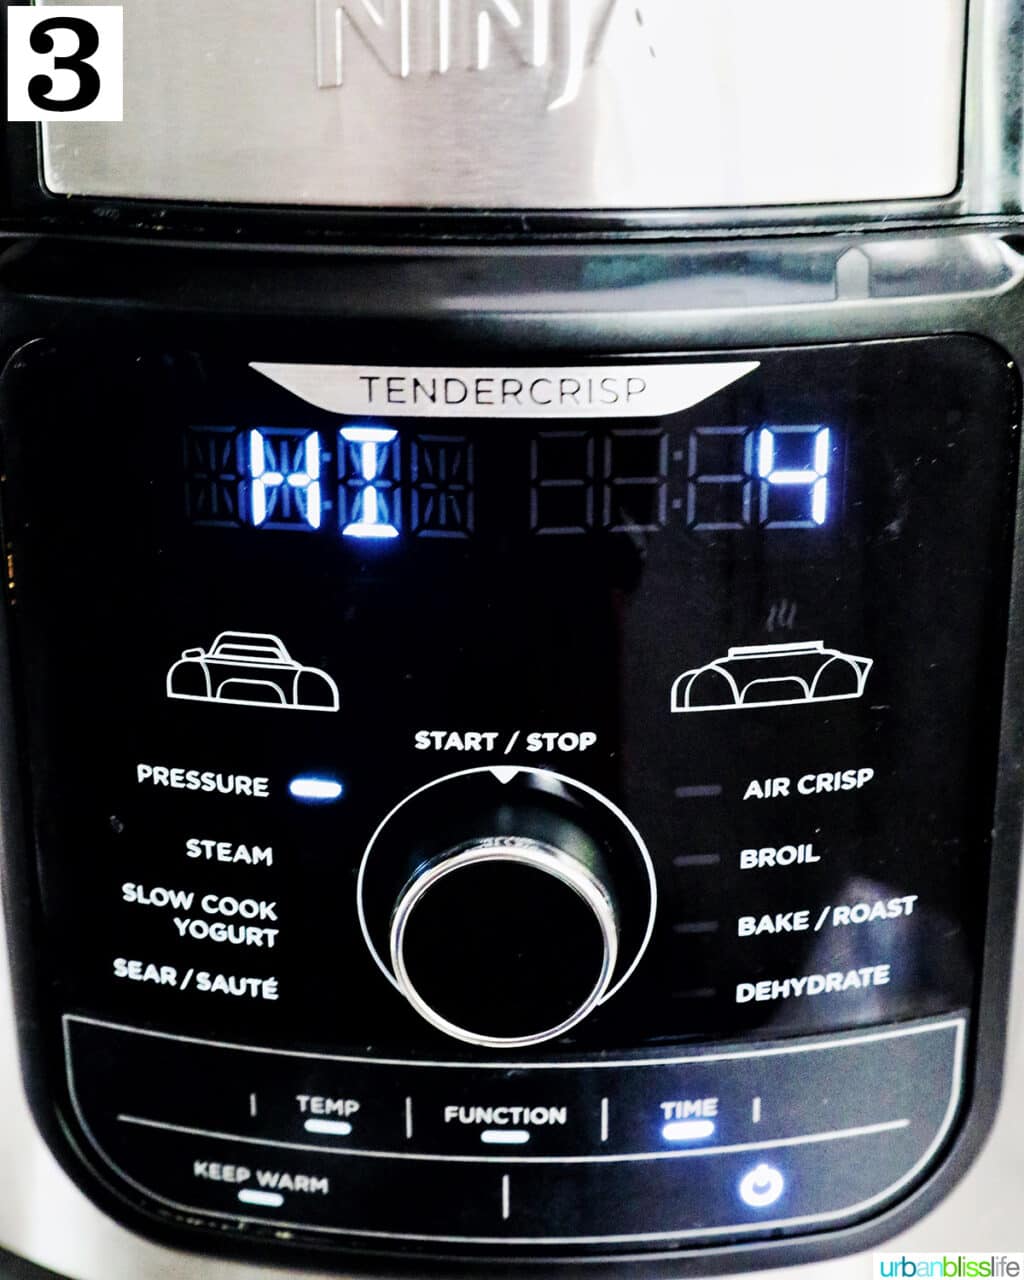 Instant pot pressure cooker set to pressure cook on high for 4 minutes.